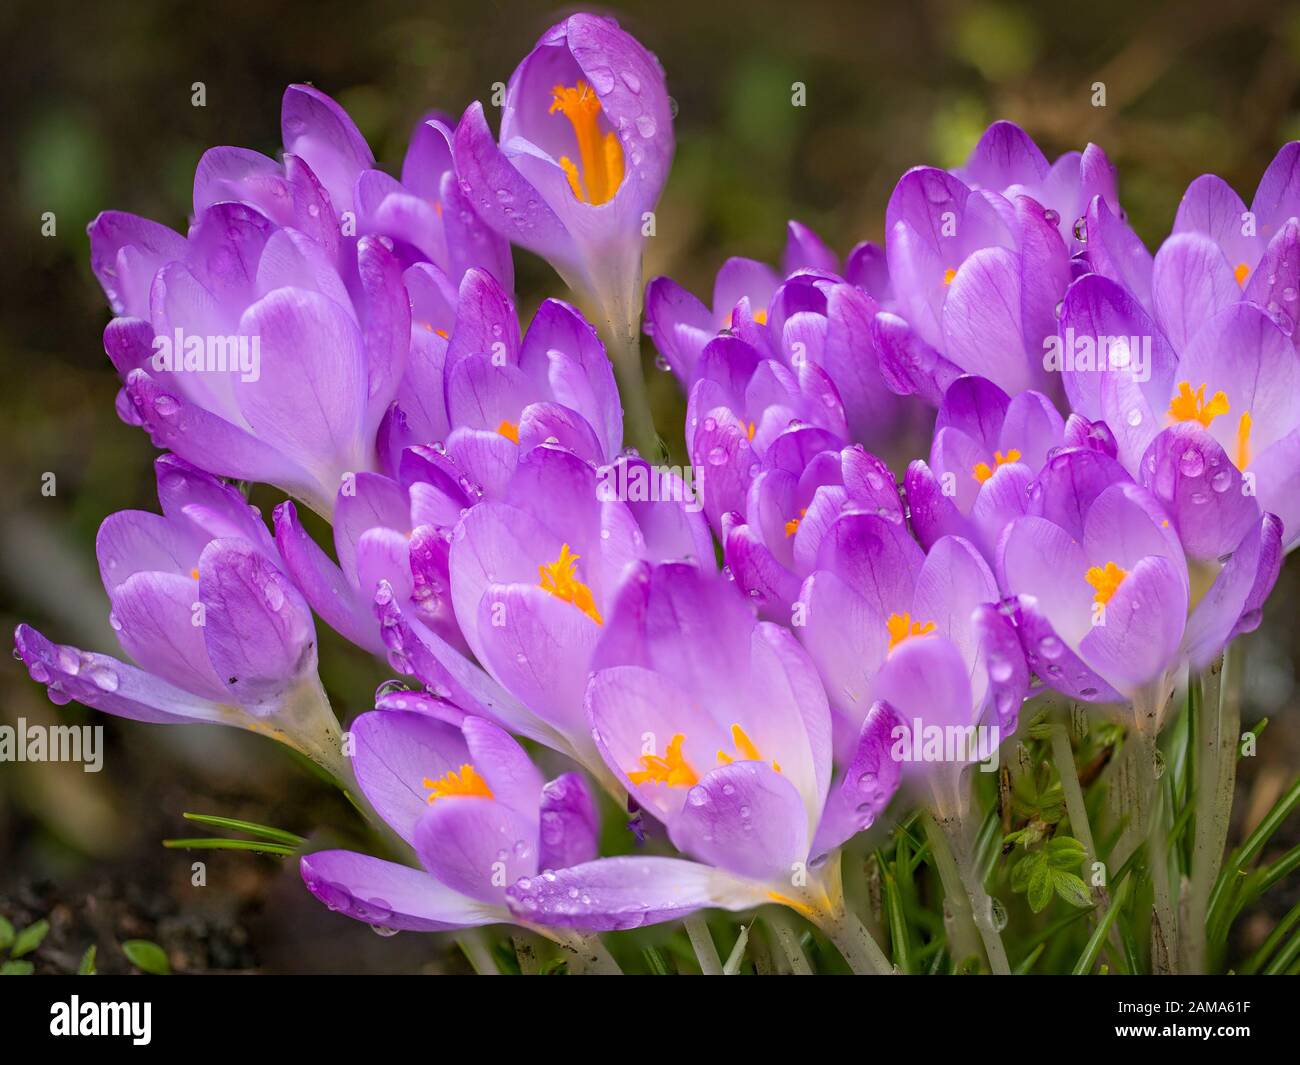 A Cluster Of Croci Stock Photo